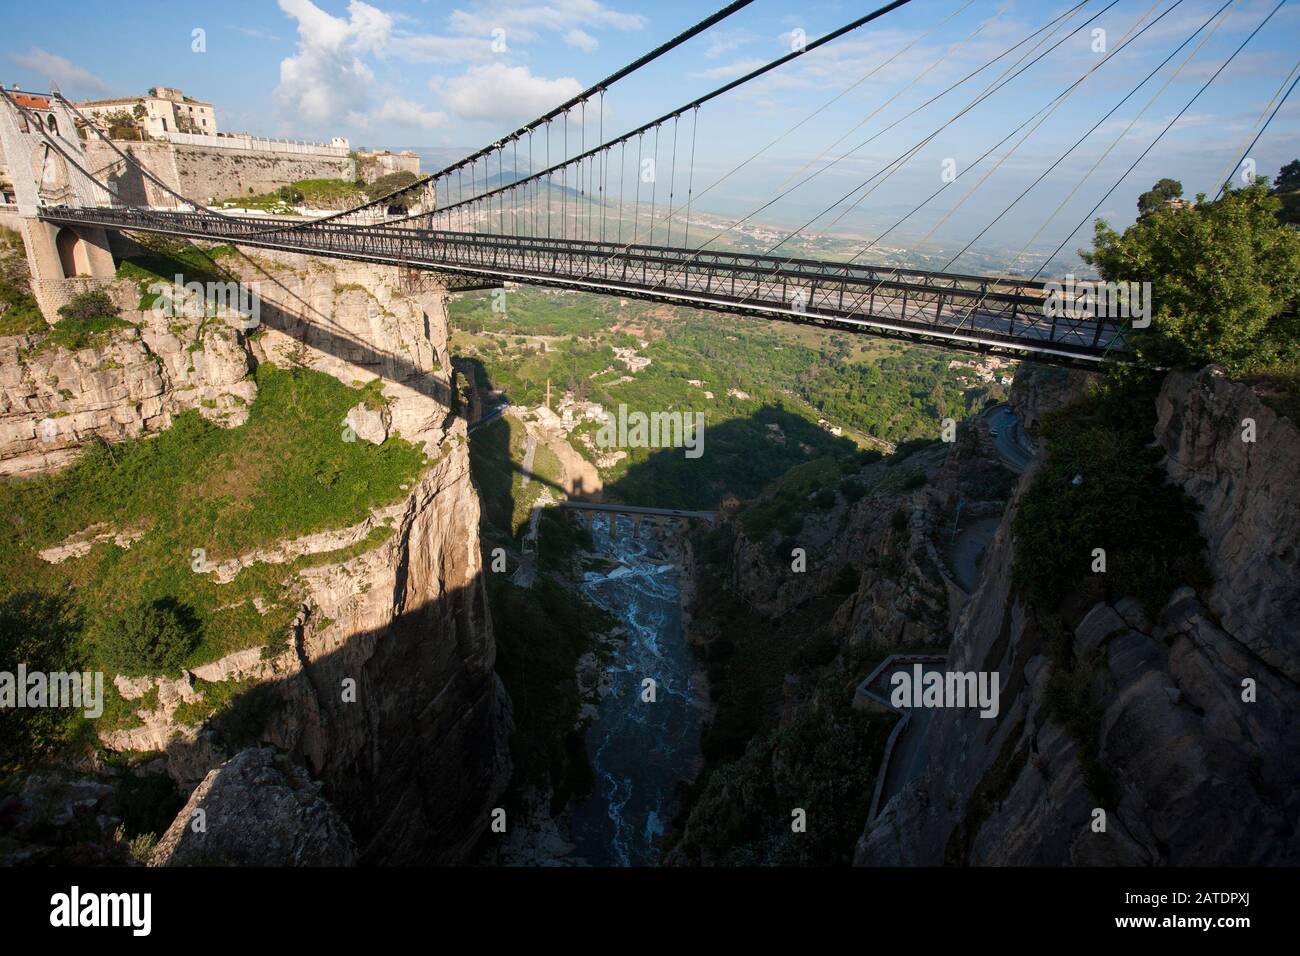 Bridges connecting both sides of the gorge to the casbah are a famous feature of Constantine, an ancient city in the north of Algeria. Stock Photo